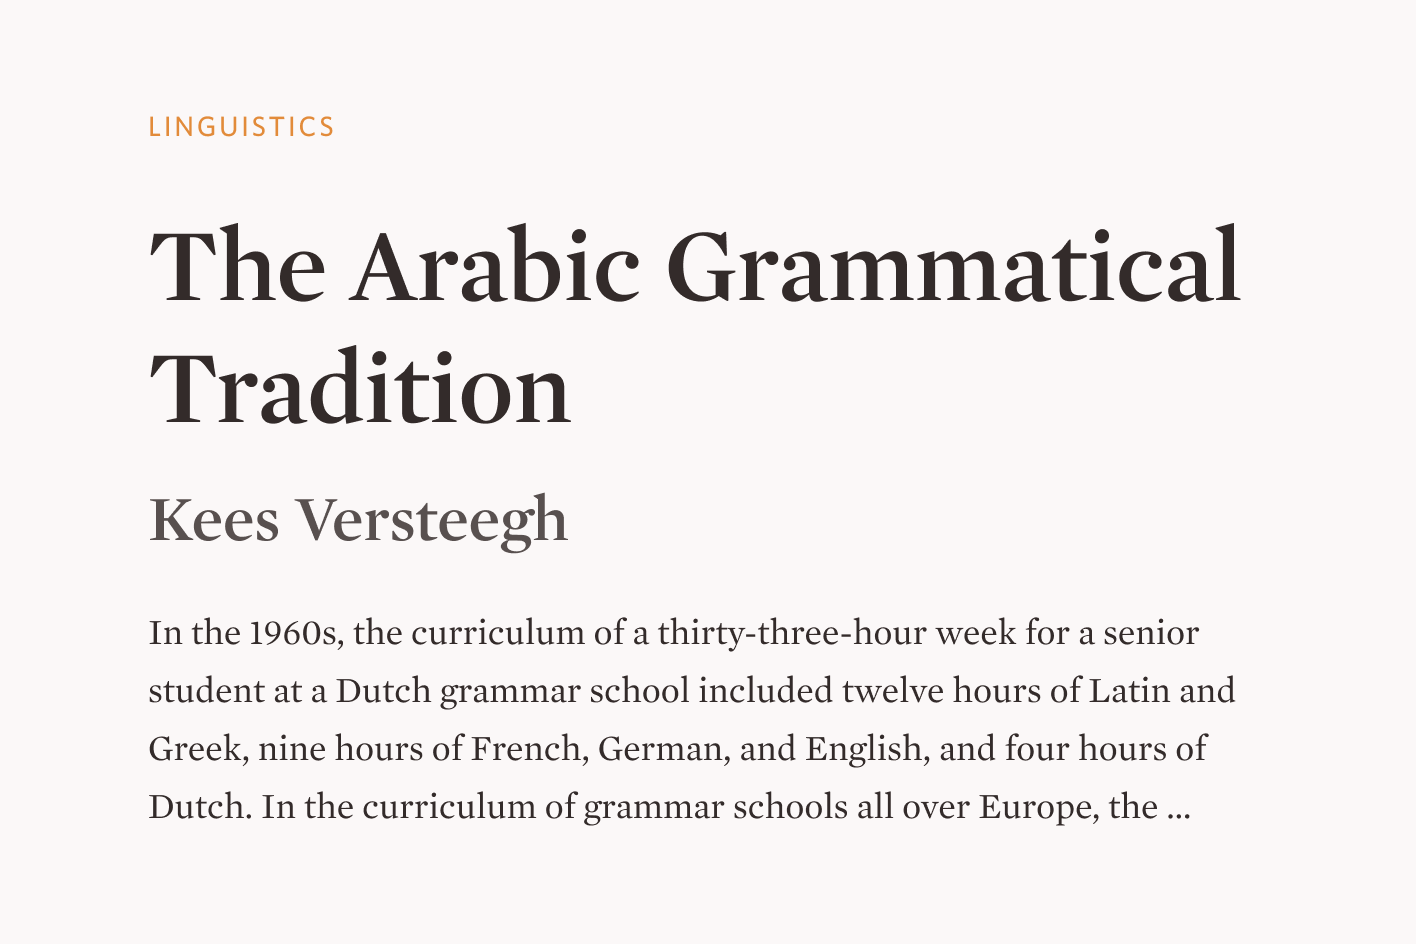 A short example of an article written for the platform about "Linguistics" with the title "The Arabic Grammatical Tradition""